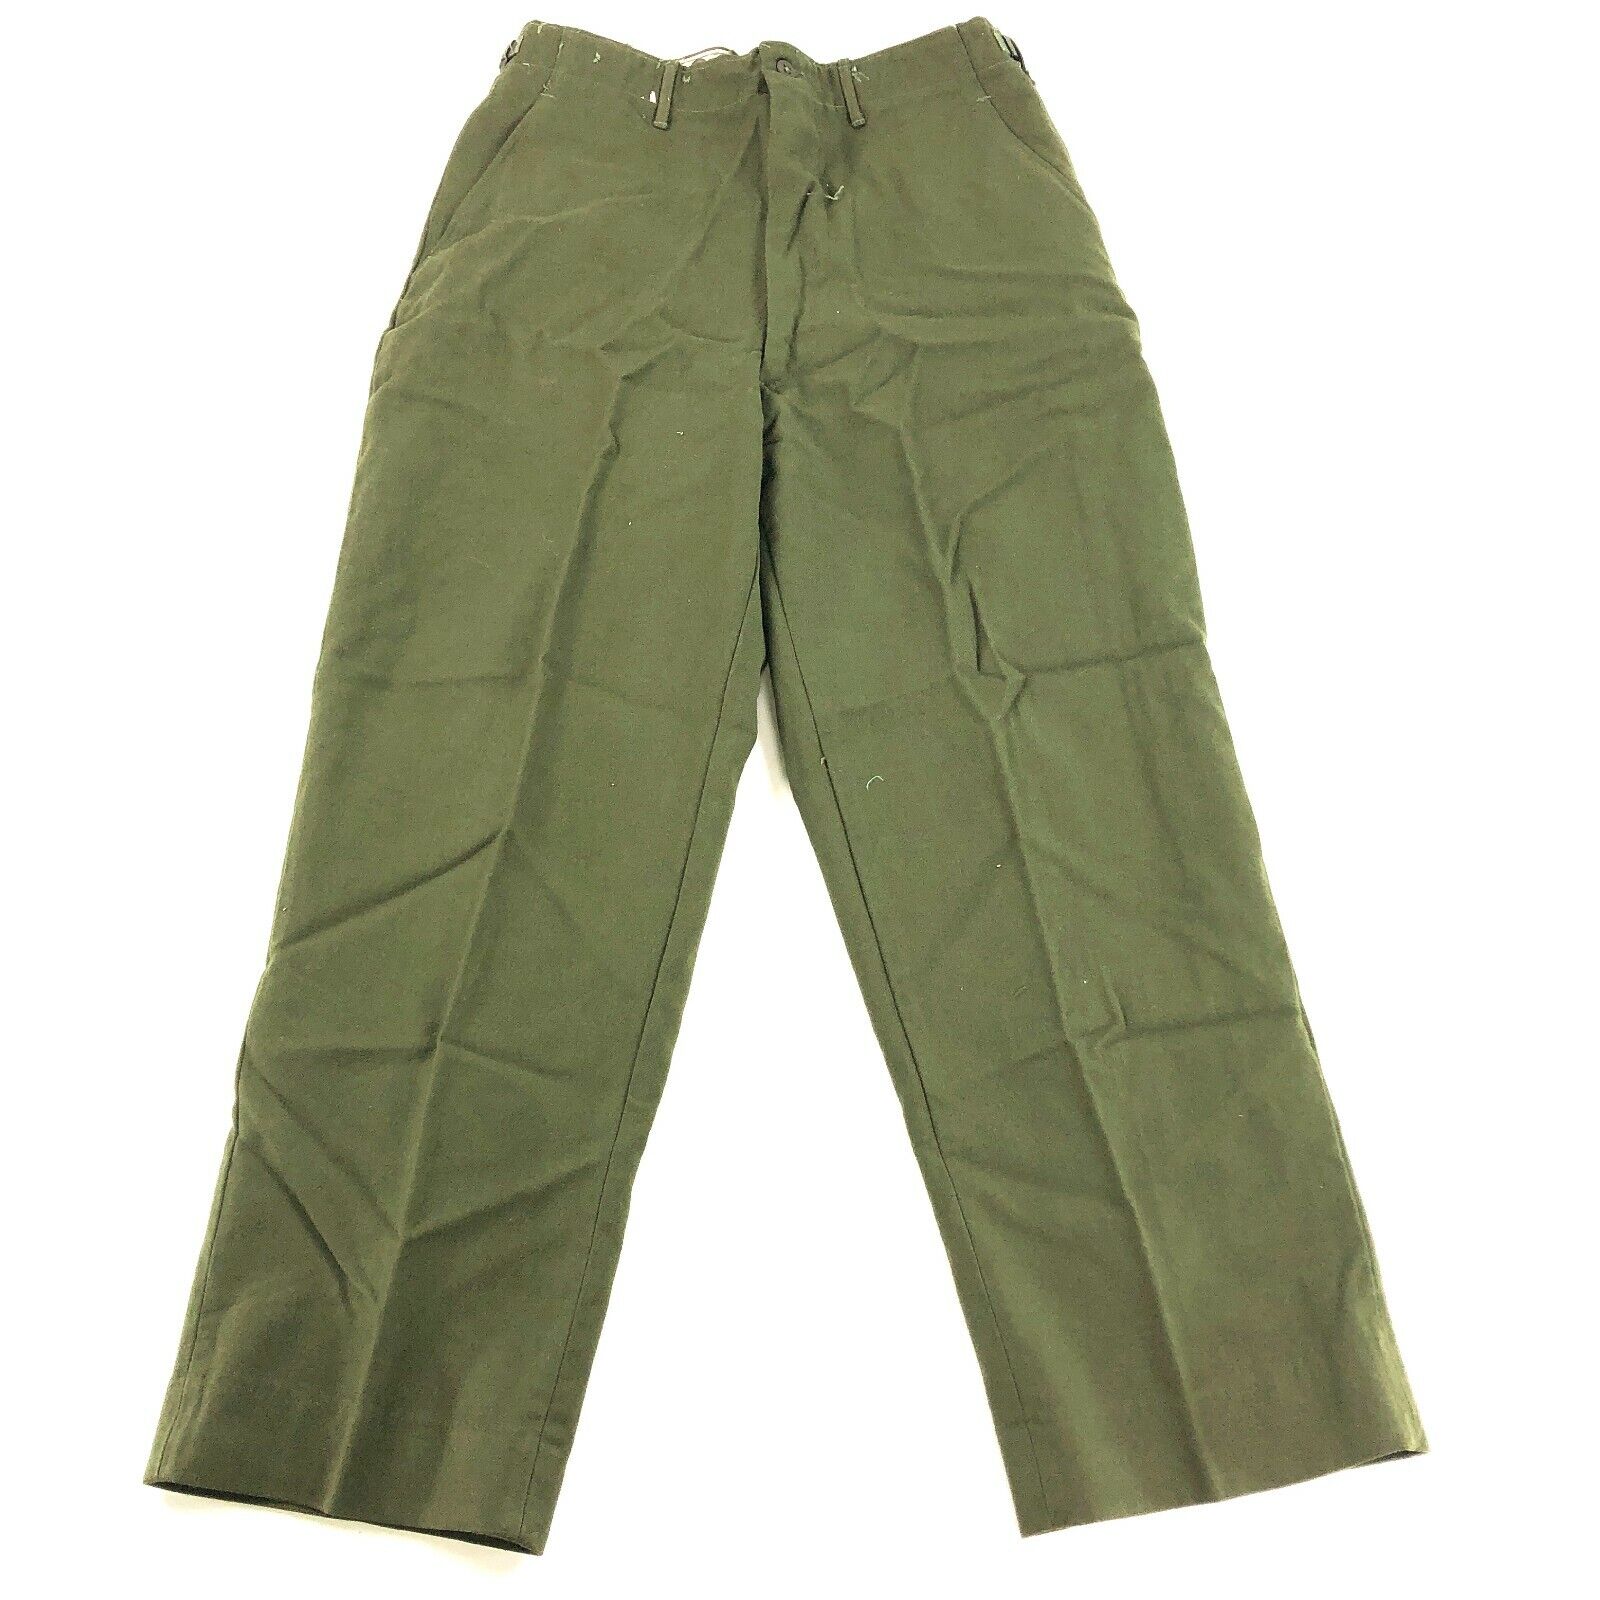 US Army OG 108 Wool Trousers Winter Vintage 1951 Military Olive Green Pants